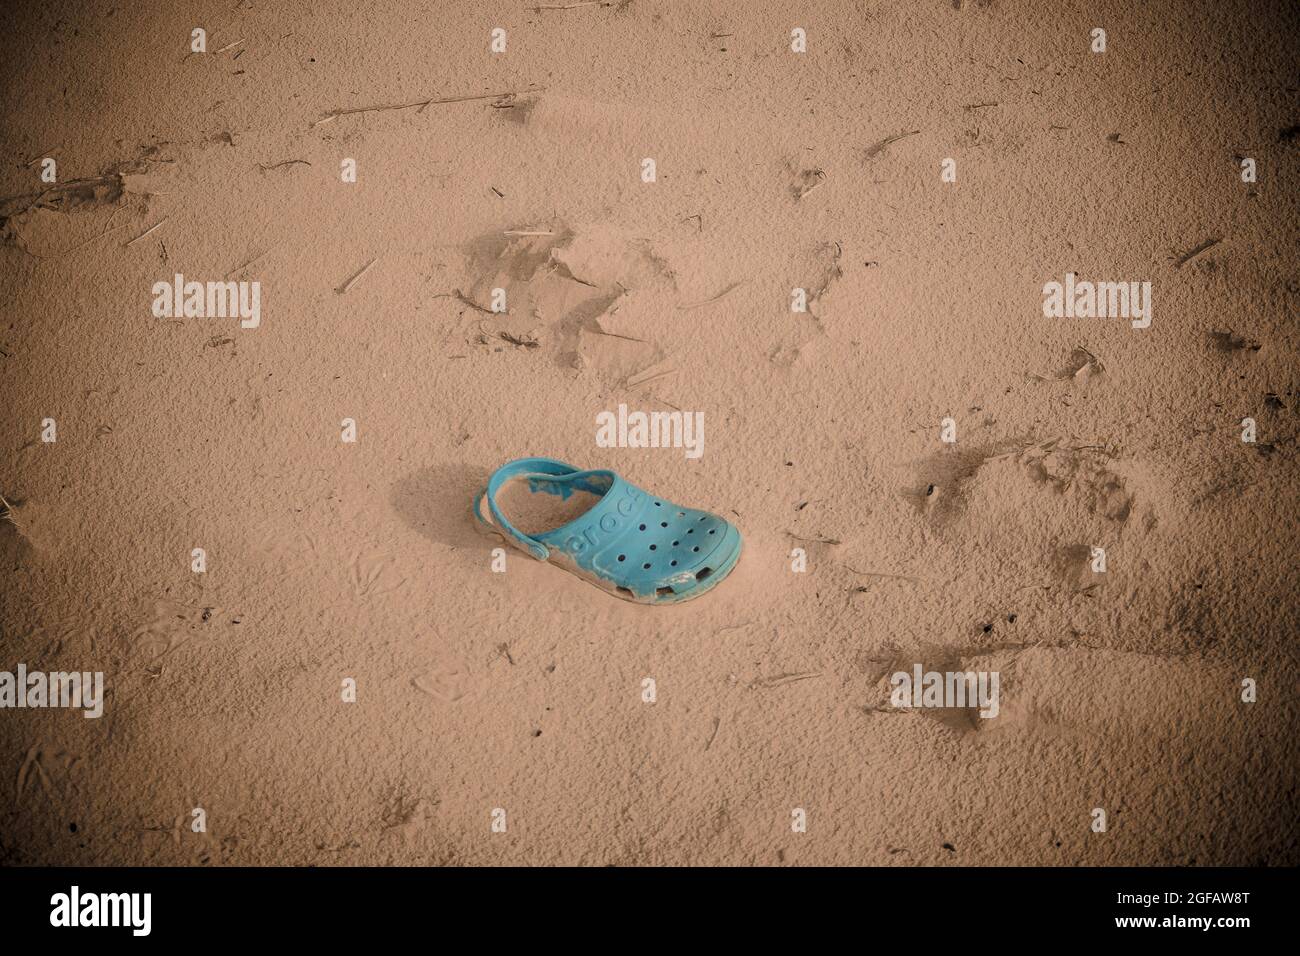 Turquoise classic croc clog abandoned on sand dunes. The 'digital aqua' colored shoe is partially buried in sand. Stock Photo